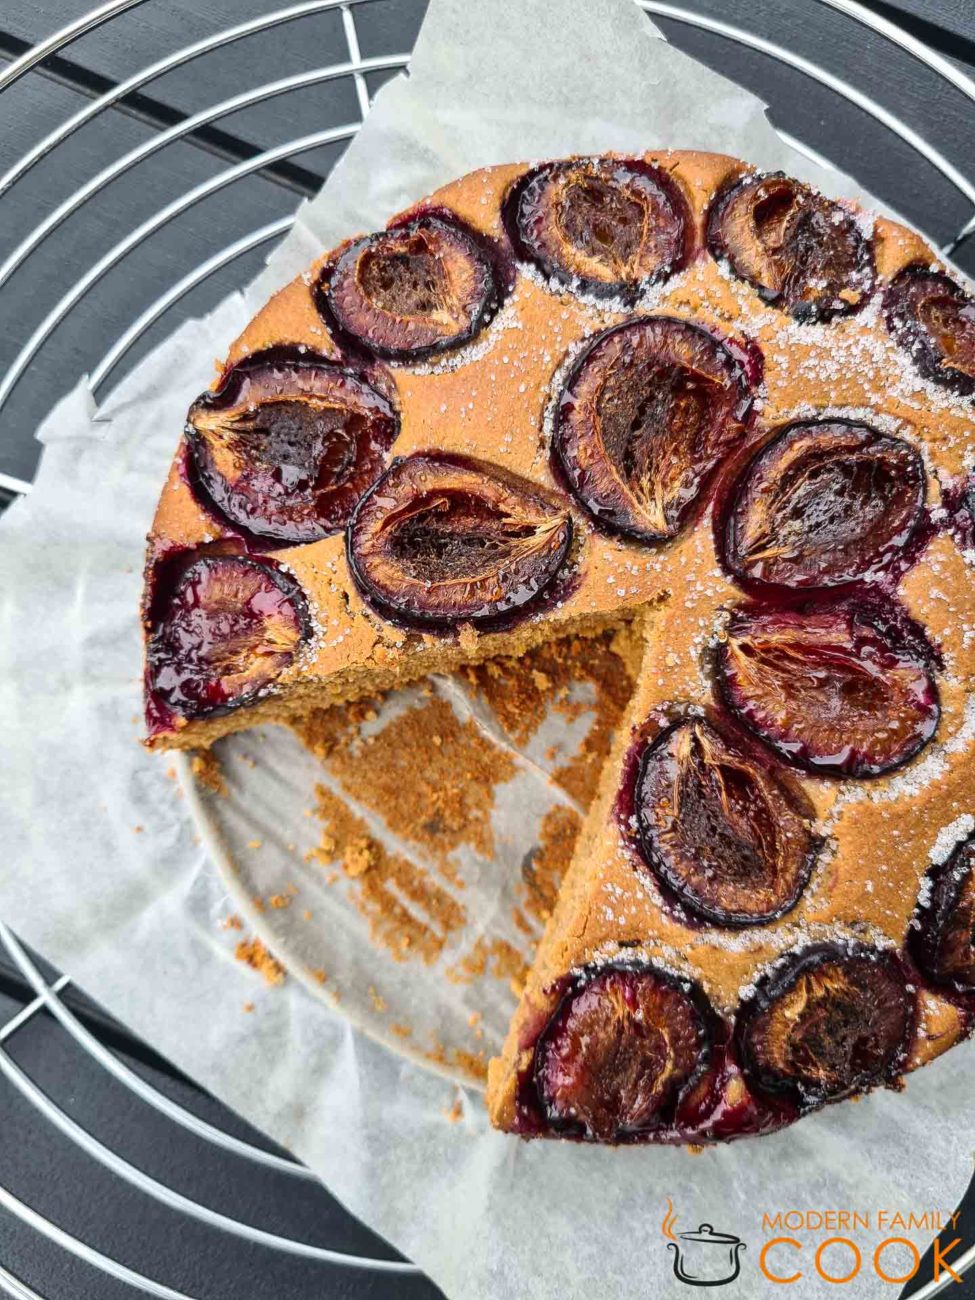 Plum Cake with Almond Flour and Coconut Sugar (gluten-free, dairy-free)